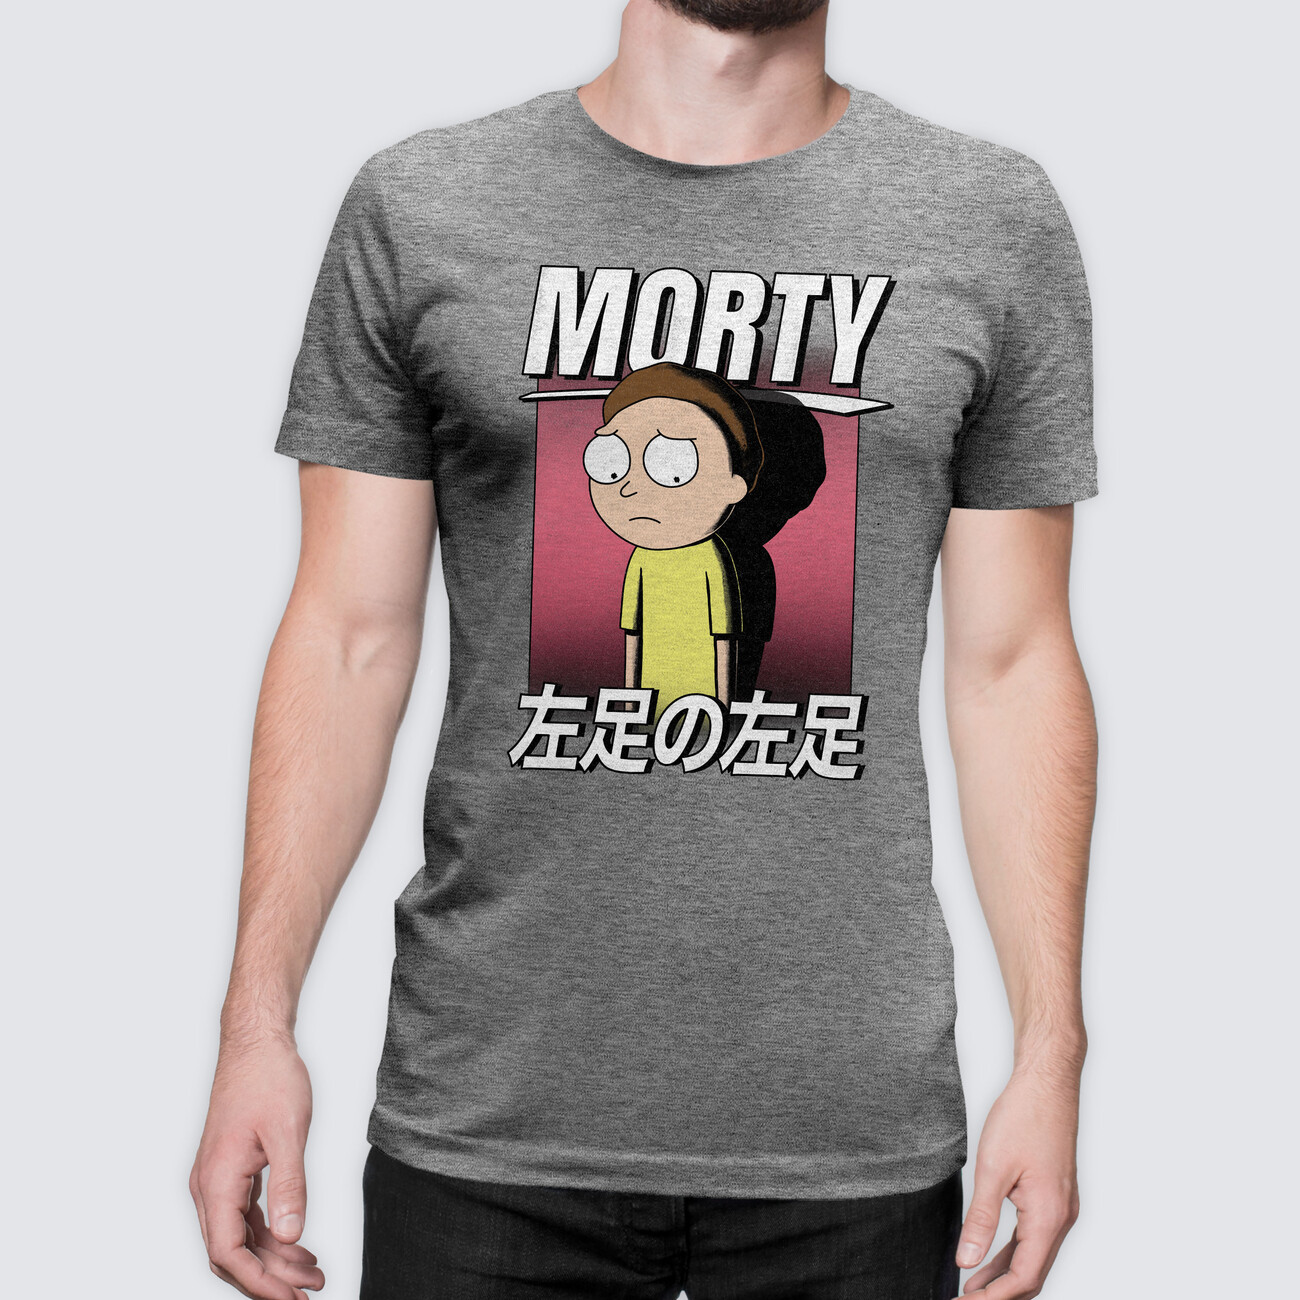 Rick and Morty Morty | Clothes and accessories for merchandise fans